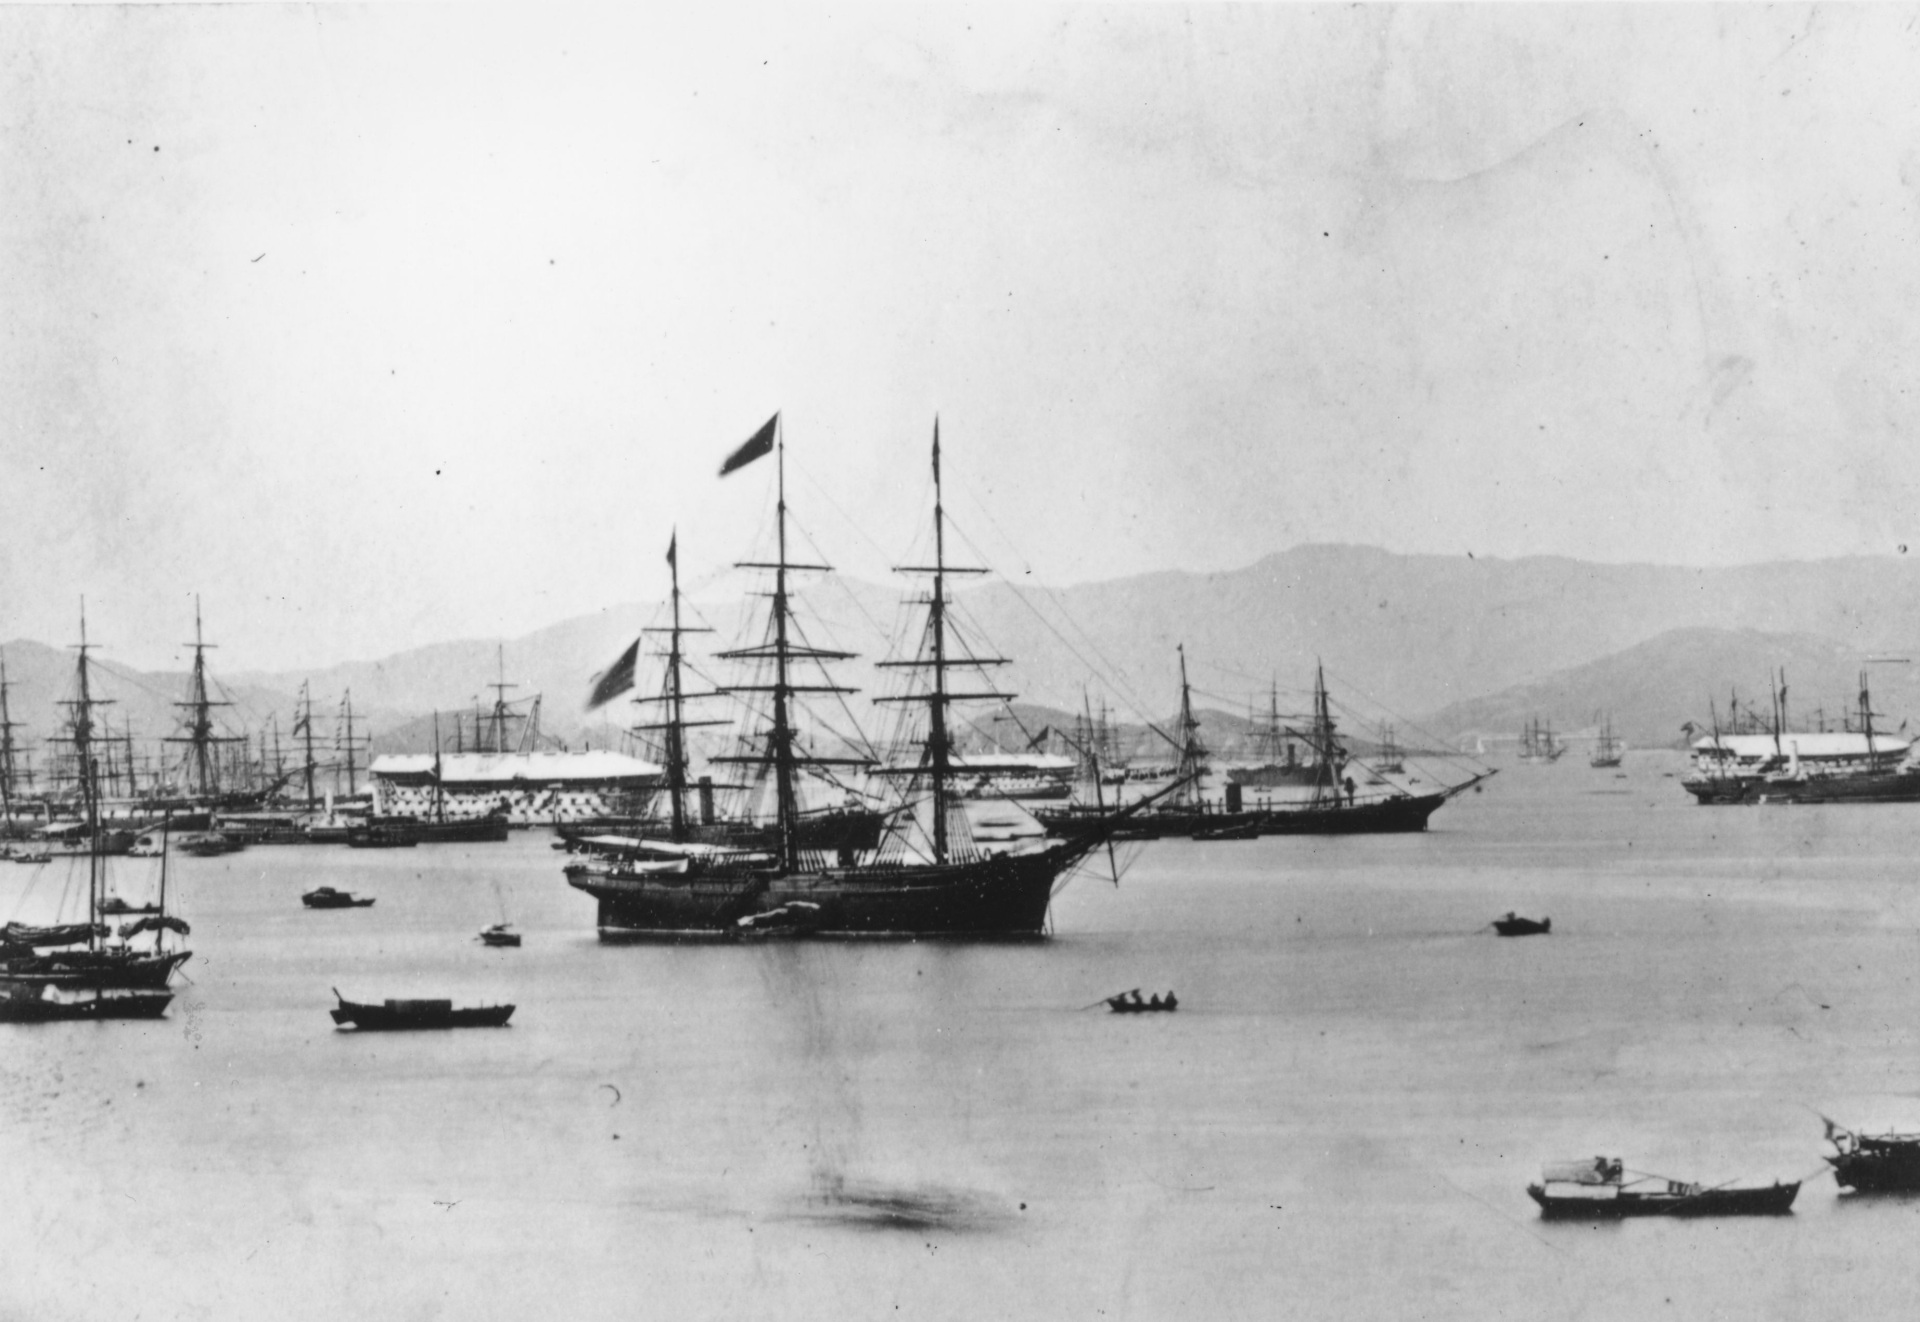 1860: A sailing ship in Victoria harbour, Hong Kong , surrounded by other boats. (Photo by Hulton Archive/Getty Images)